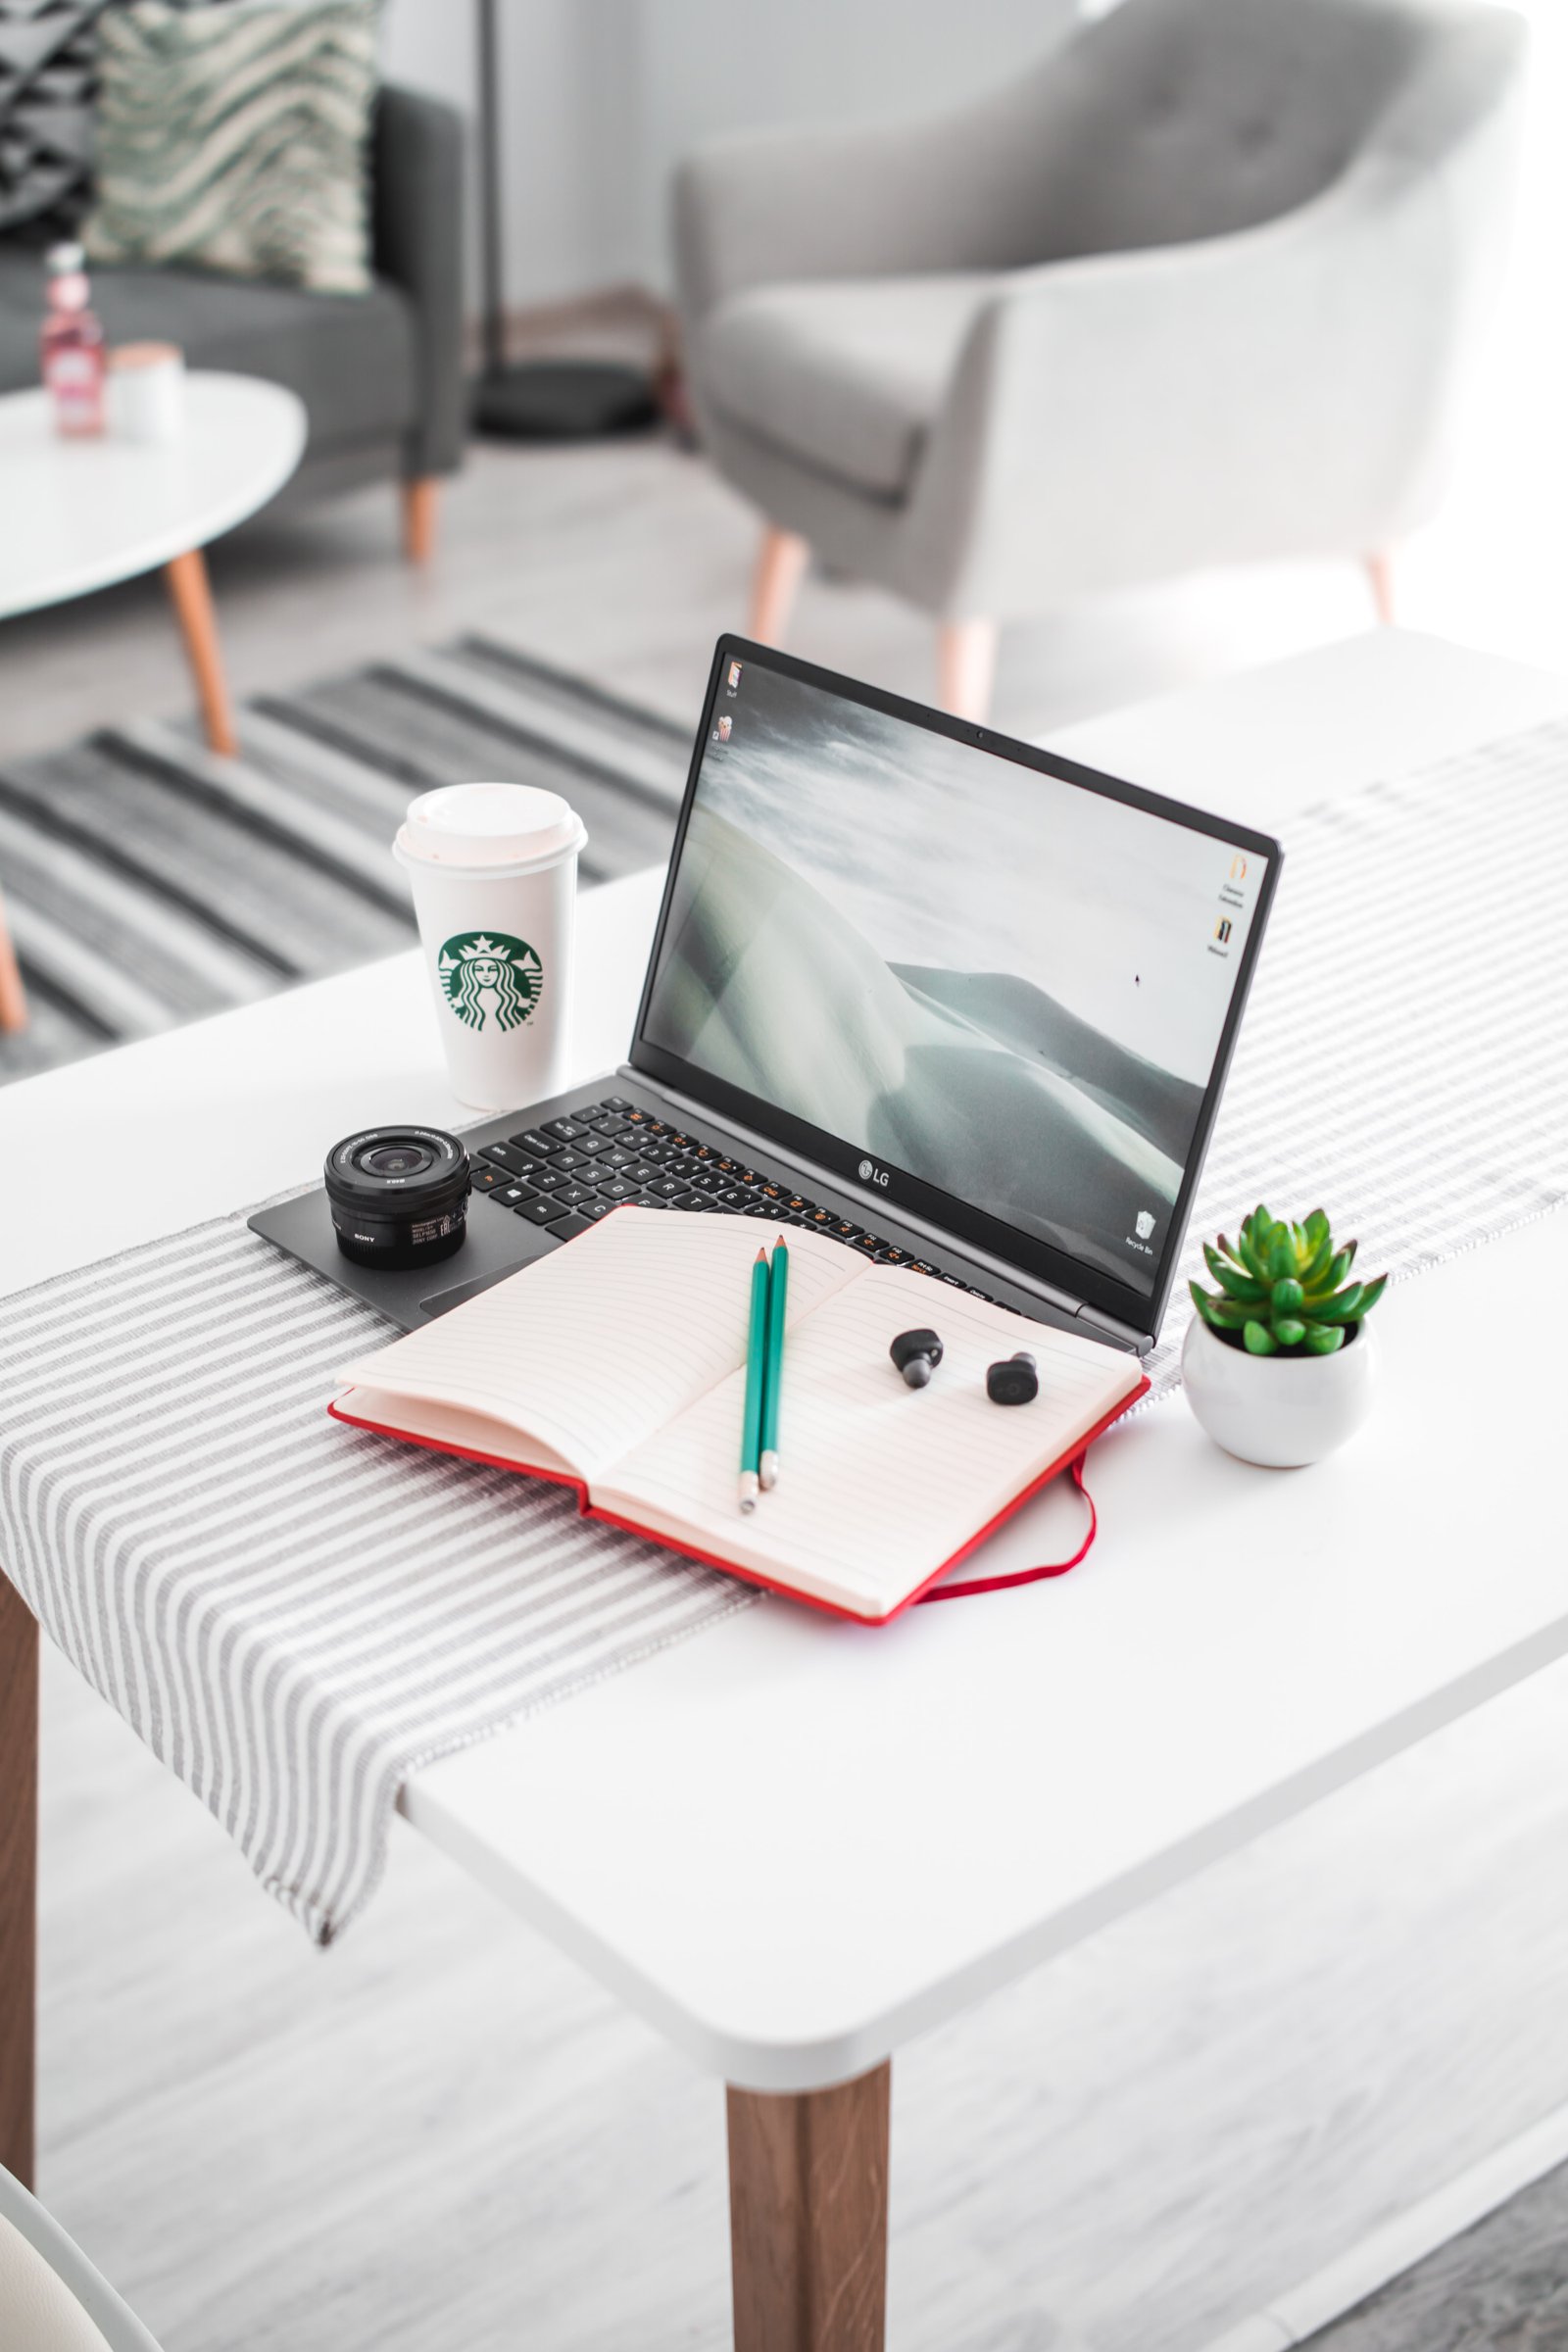 improve productivity while working remotely